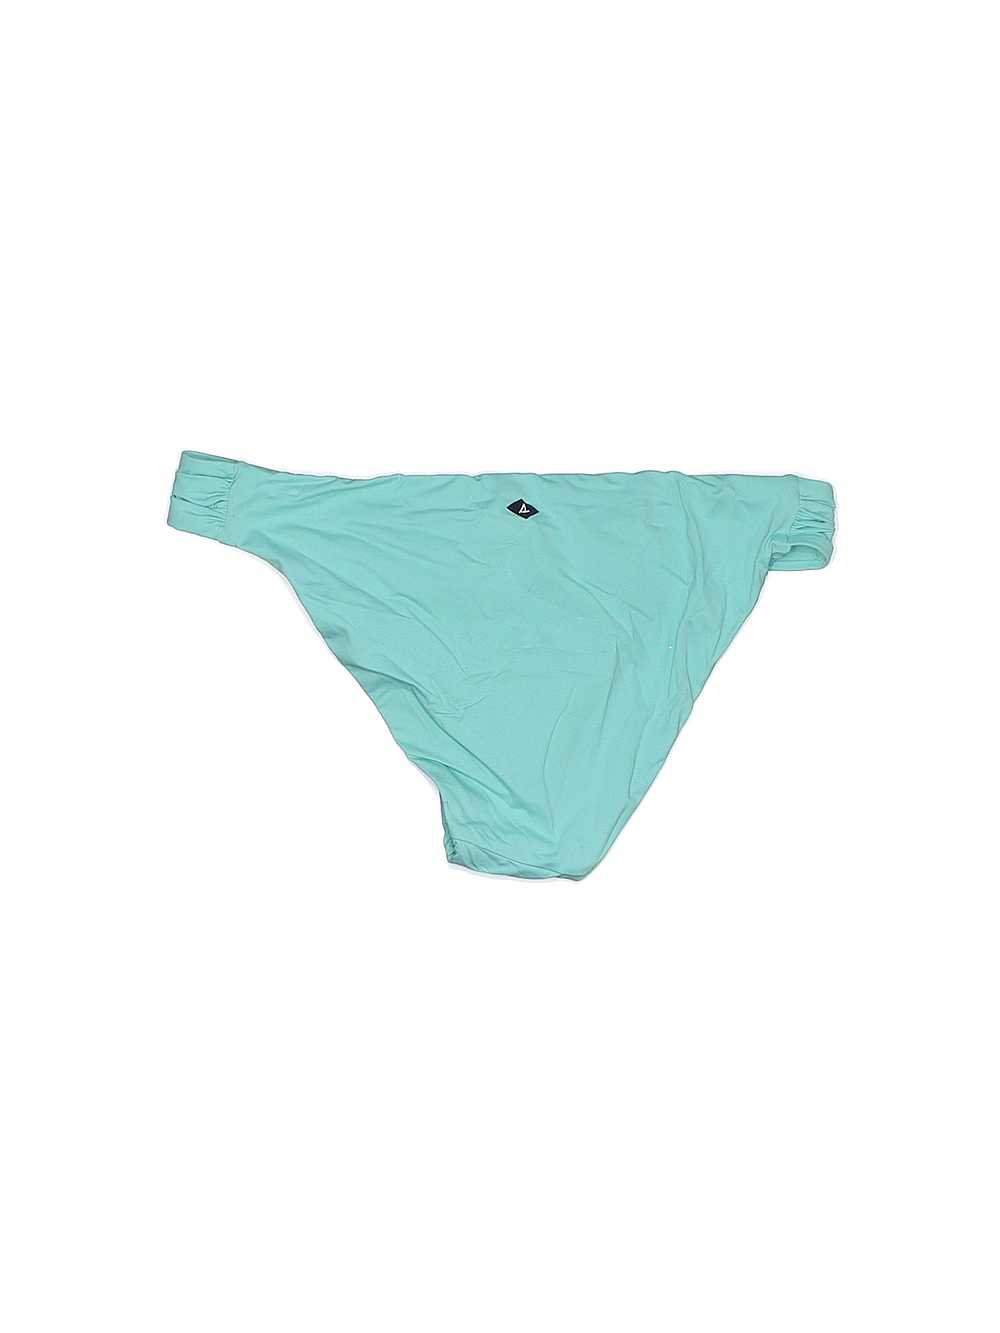 Sperry Top Sider Women Green Swimsuit Bottoms S - image 2